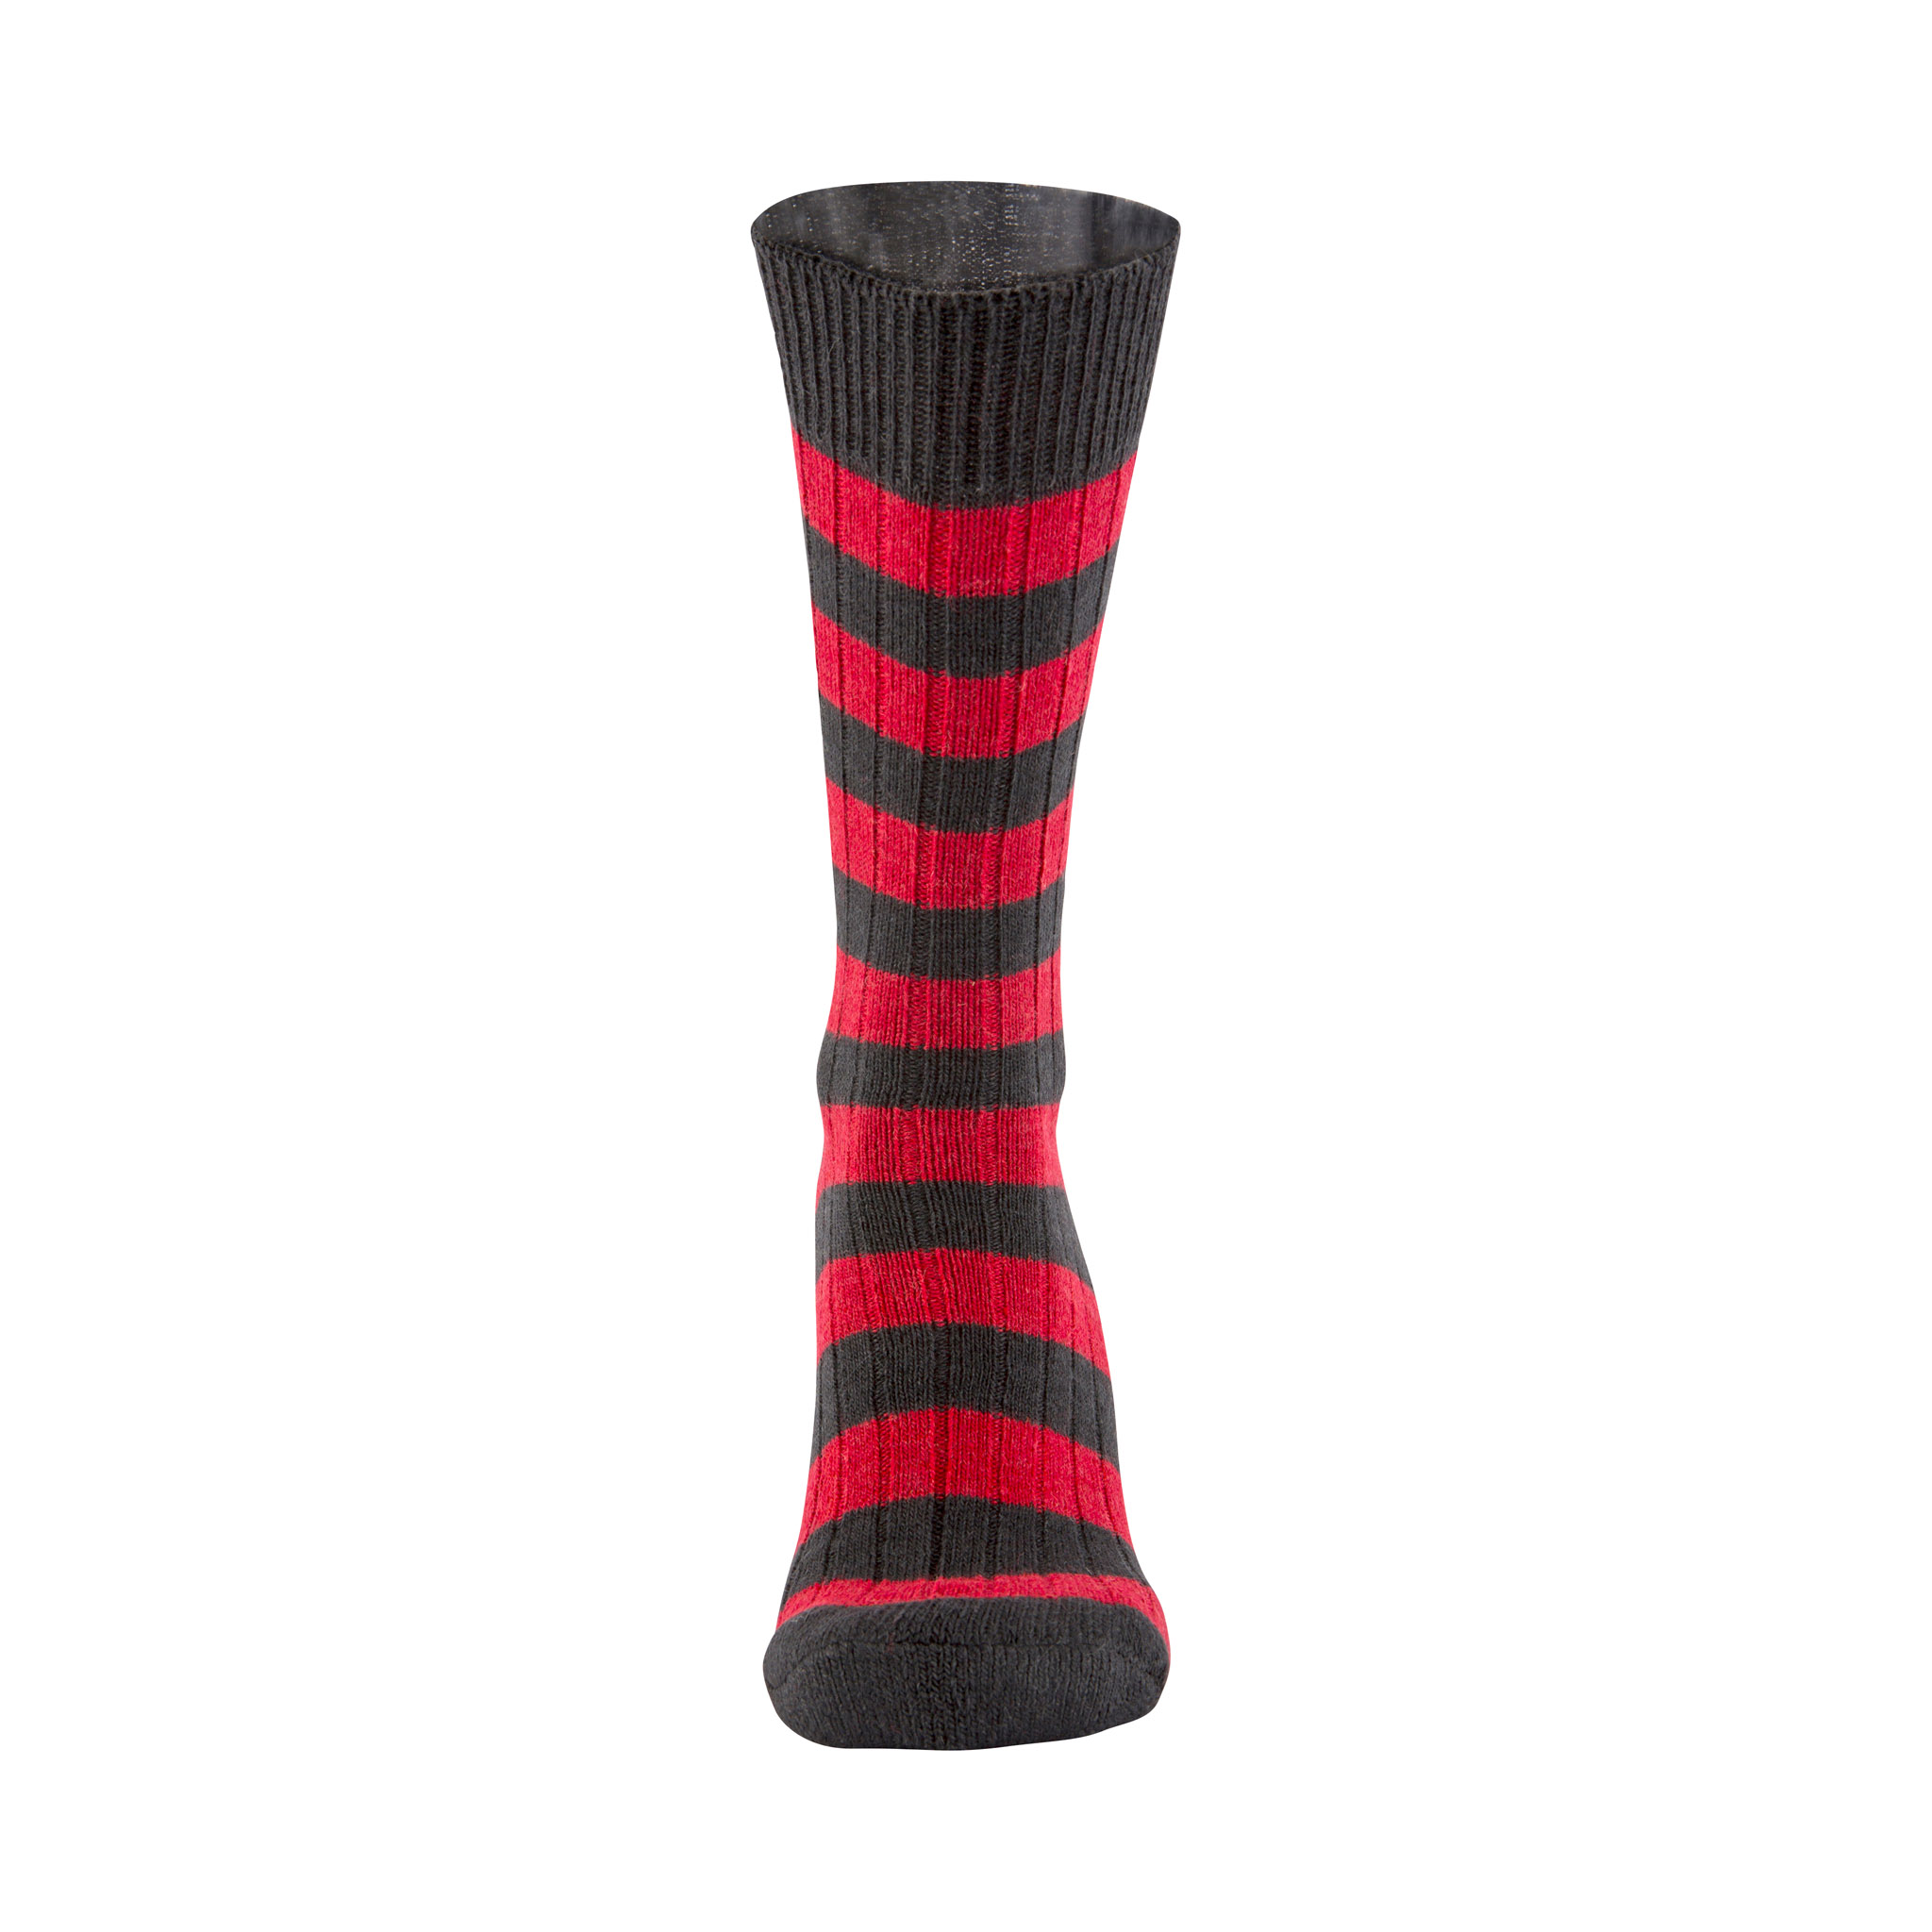 Merino Wool black and red stripe sock - front